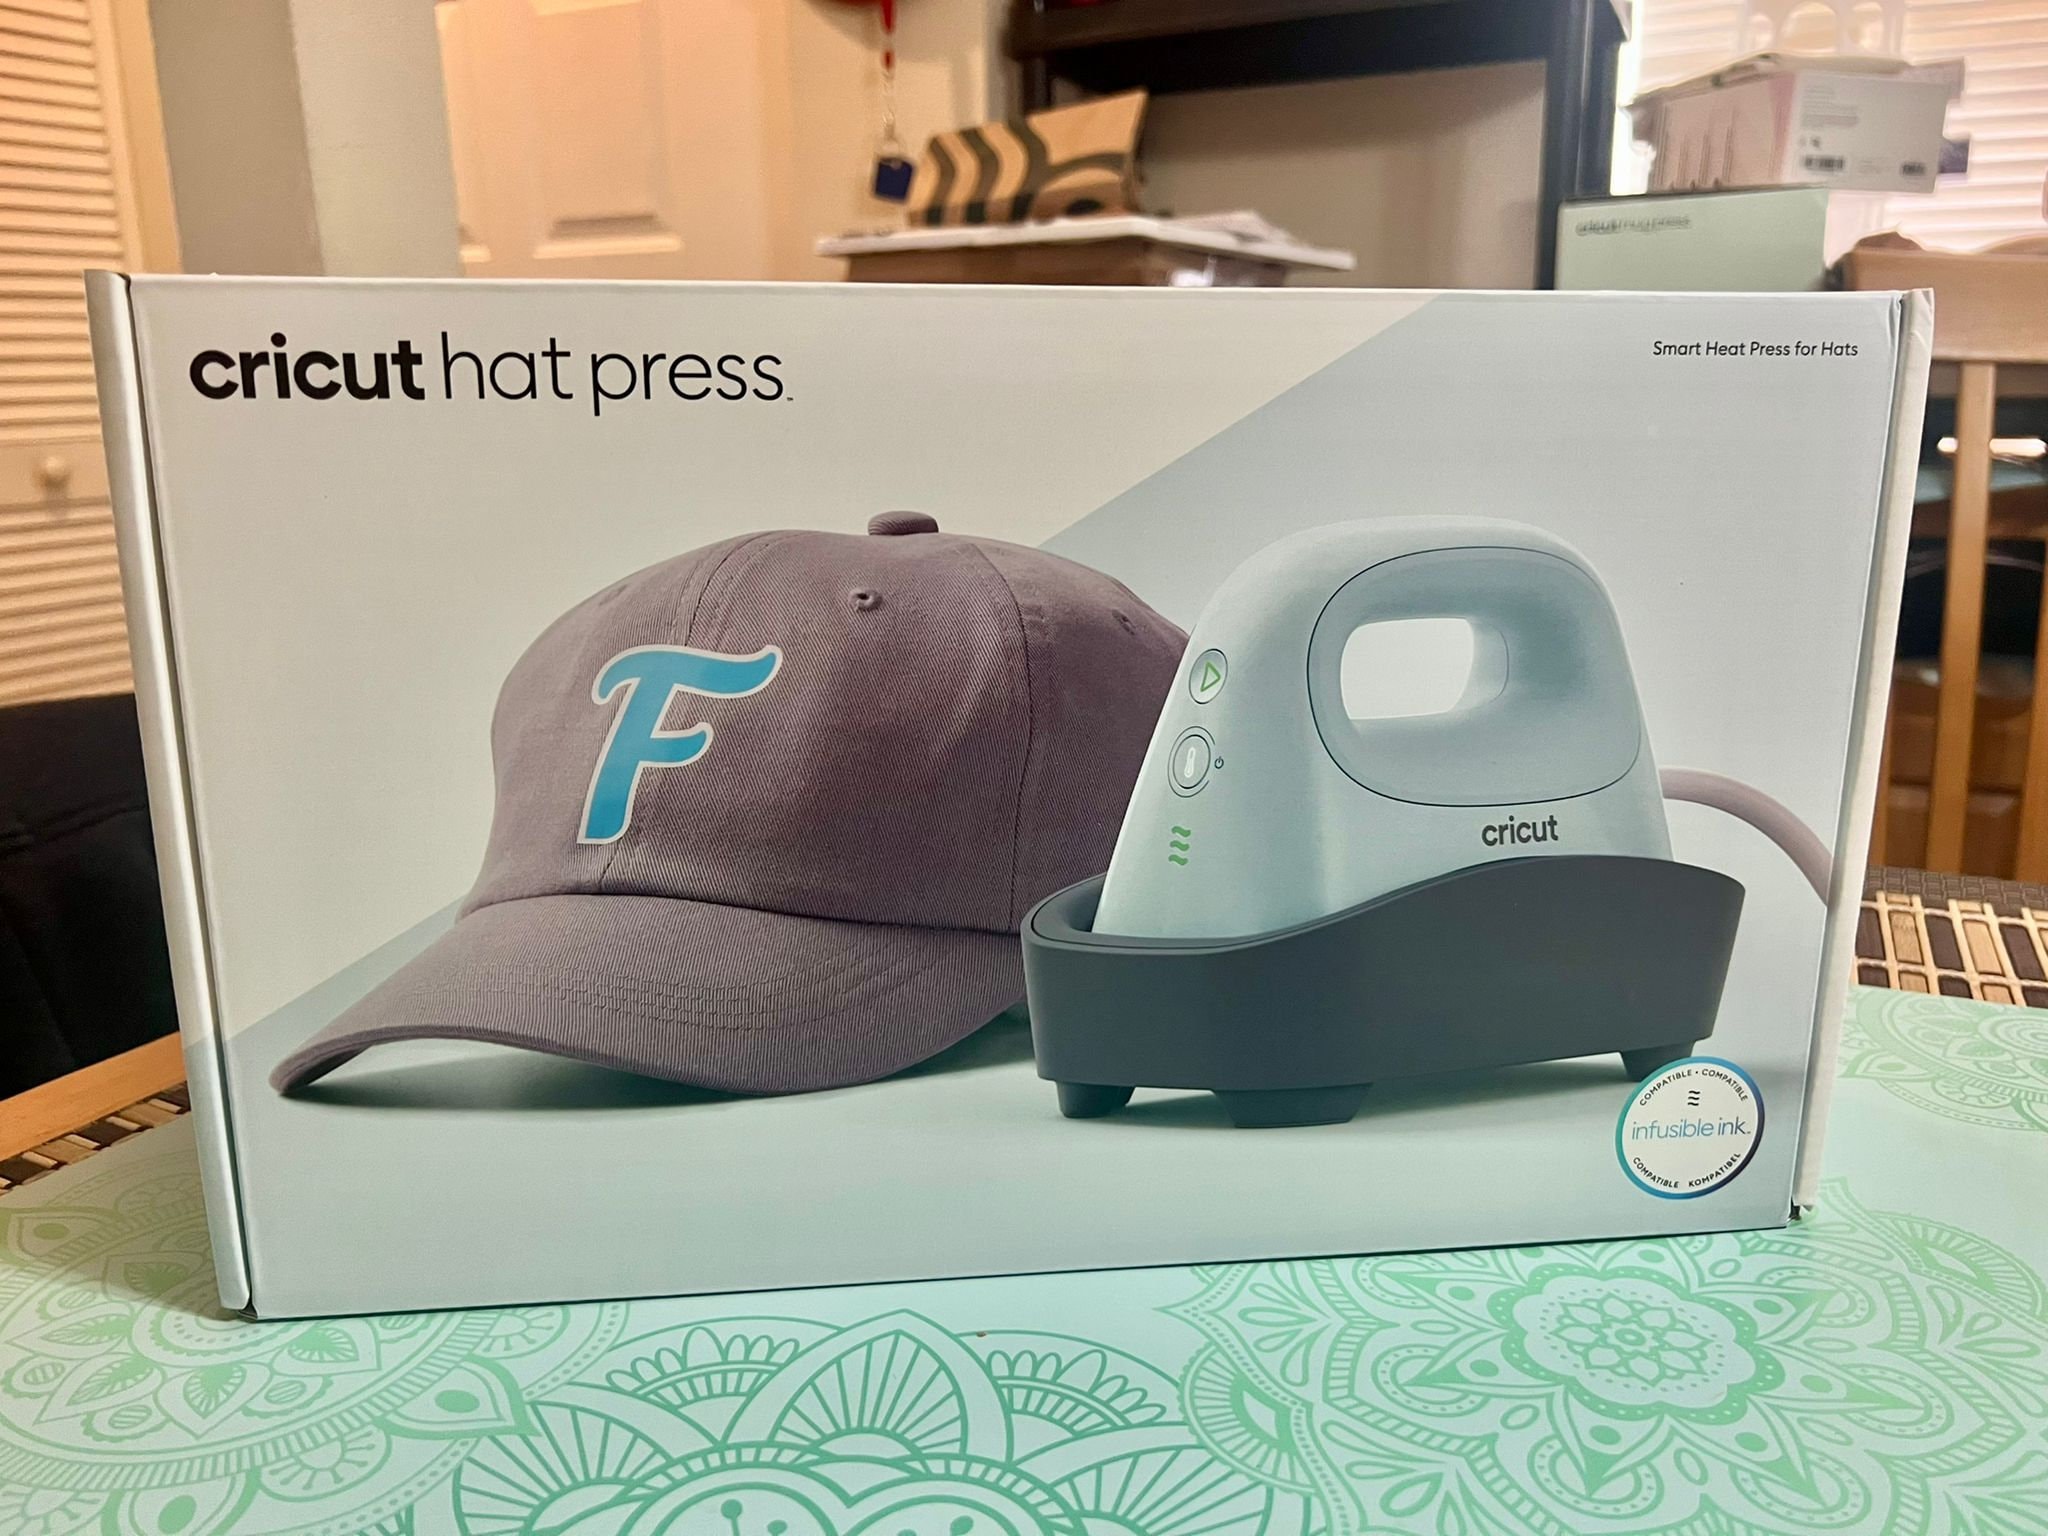 Cricut Hat Press Smart Heat Press Machine for Hats with Built-in